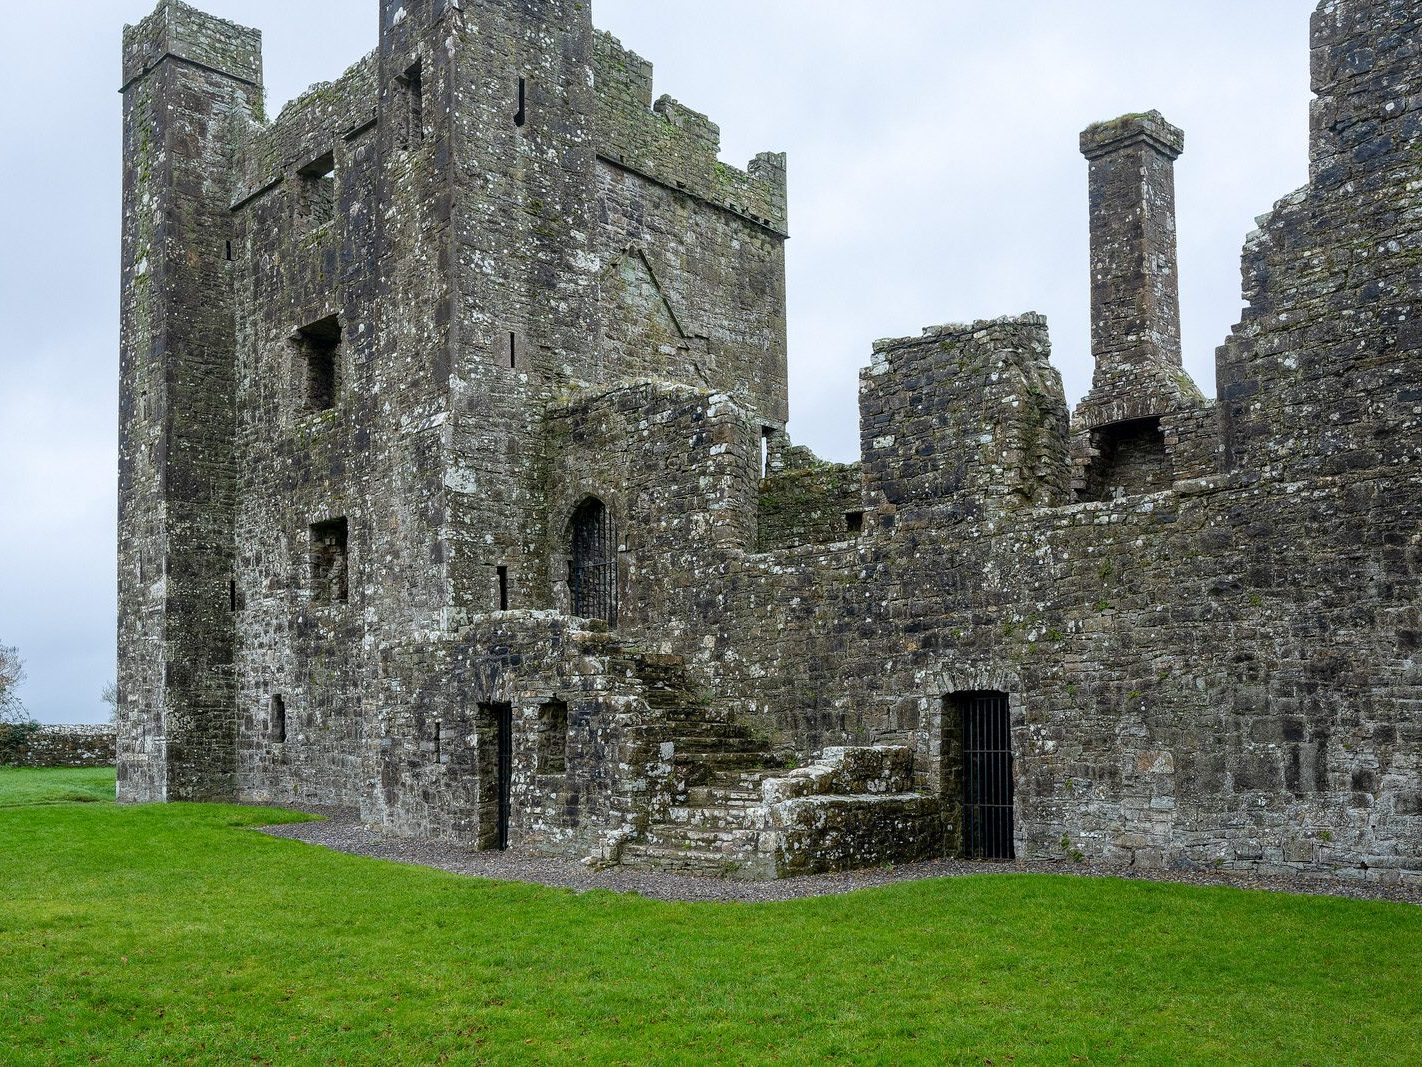 BECTIVE ABBEY WHICH I VISITED LAST CHRISTMAS [THERE WERE NO OTHER VISITORS AS IT WAS A VERY WET DAY]--225257-1